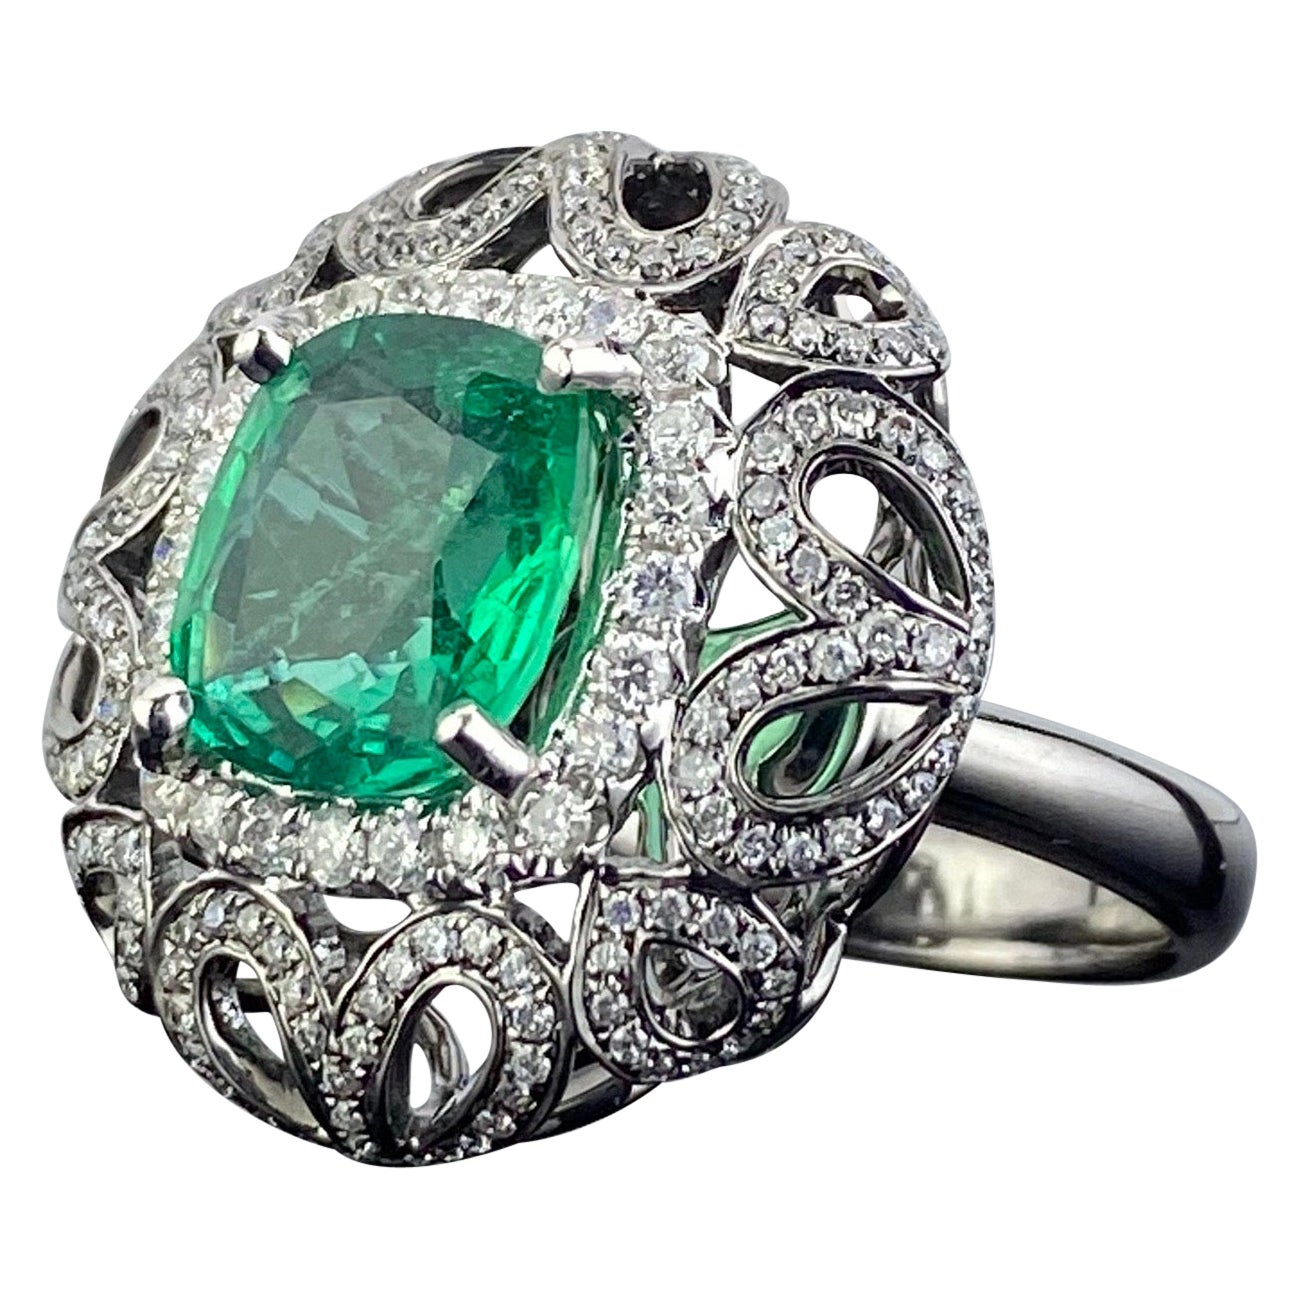 4.97 Carat Cushion Cut Zambian Emerald and Diamond Cocktail Ring For Sale